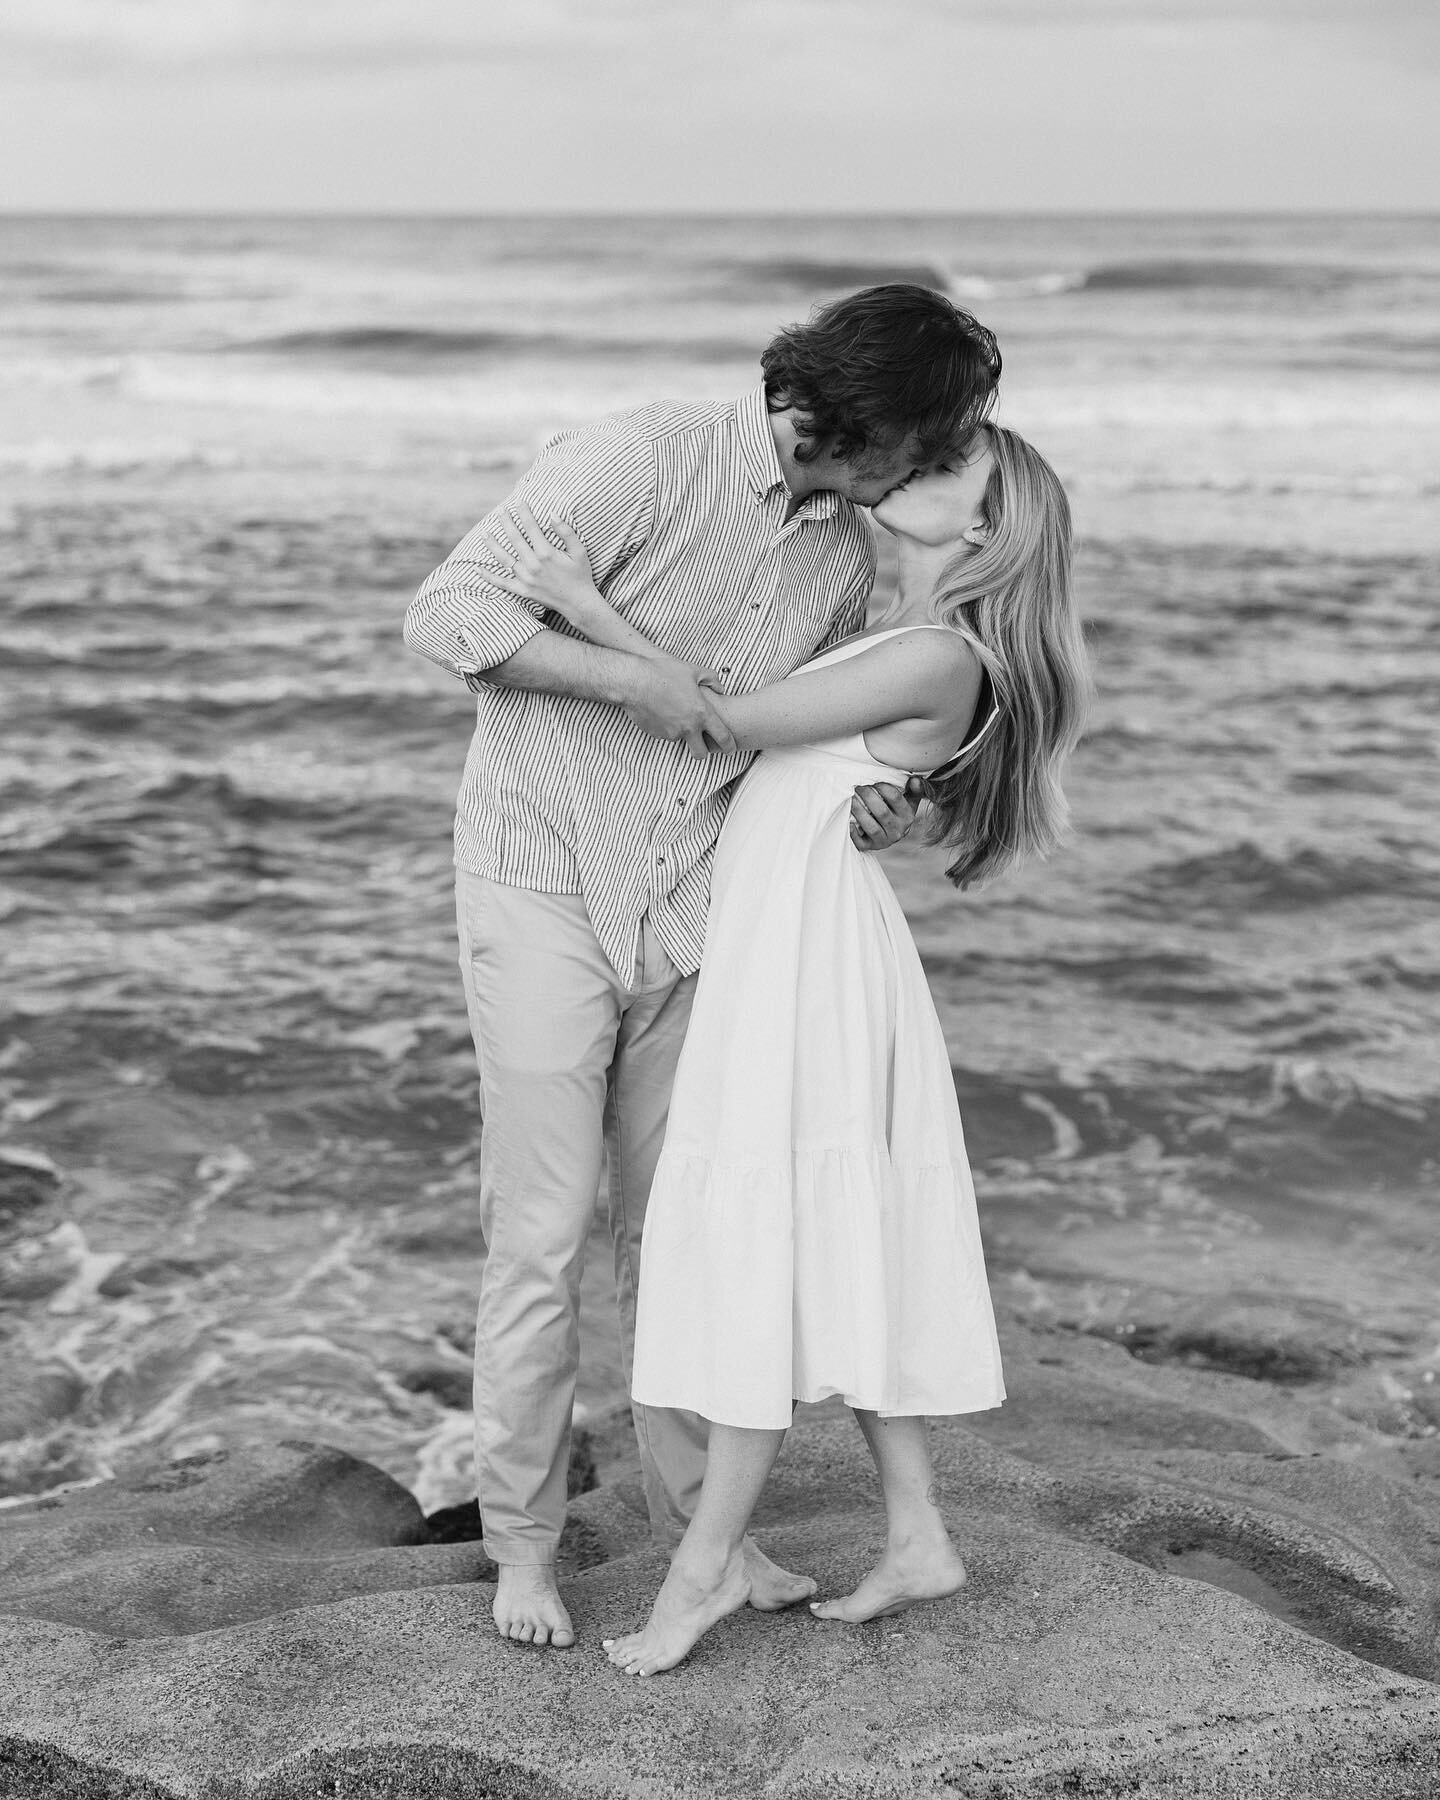 Posting beach pictures while at the beach on this fine Labor Day. I hope everyone&rsquo;s taking some time to enjoy life and their families! 

.
.
.
.
#firstandlasts #weddingphotographer #radlovestories #bitesandtickles #belovedstories #authenticlove